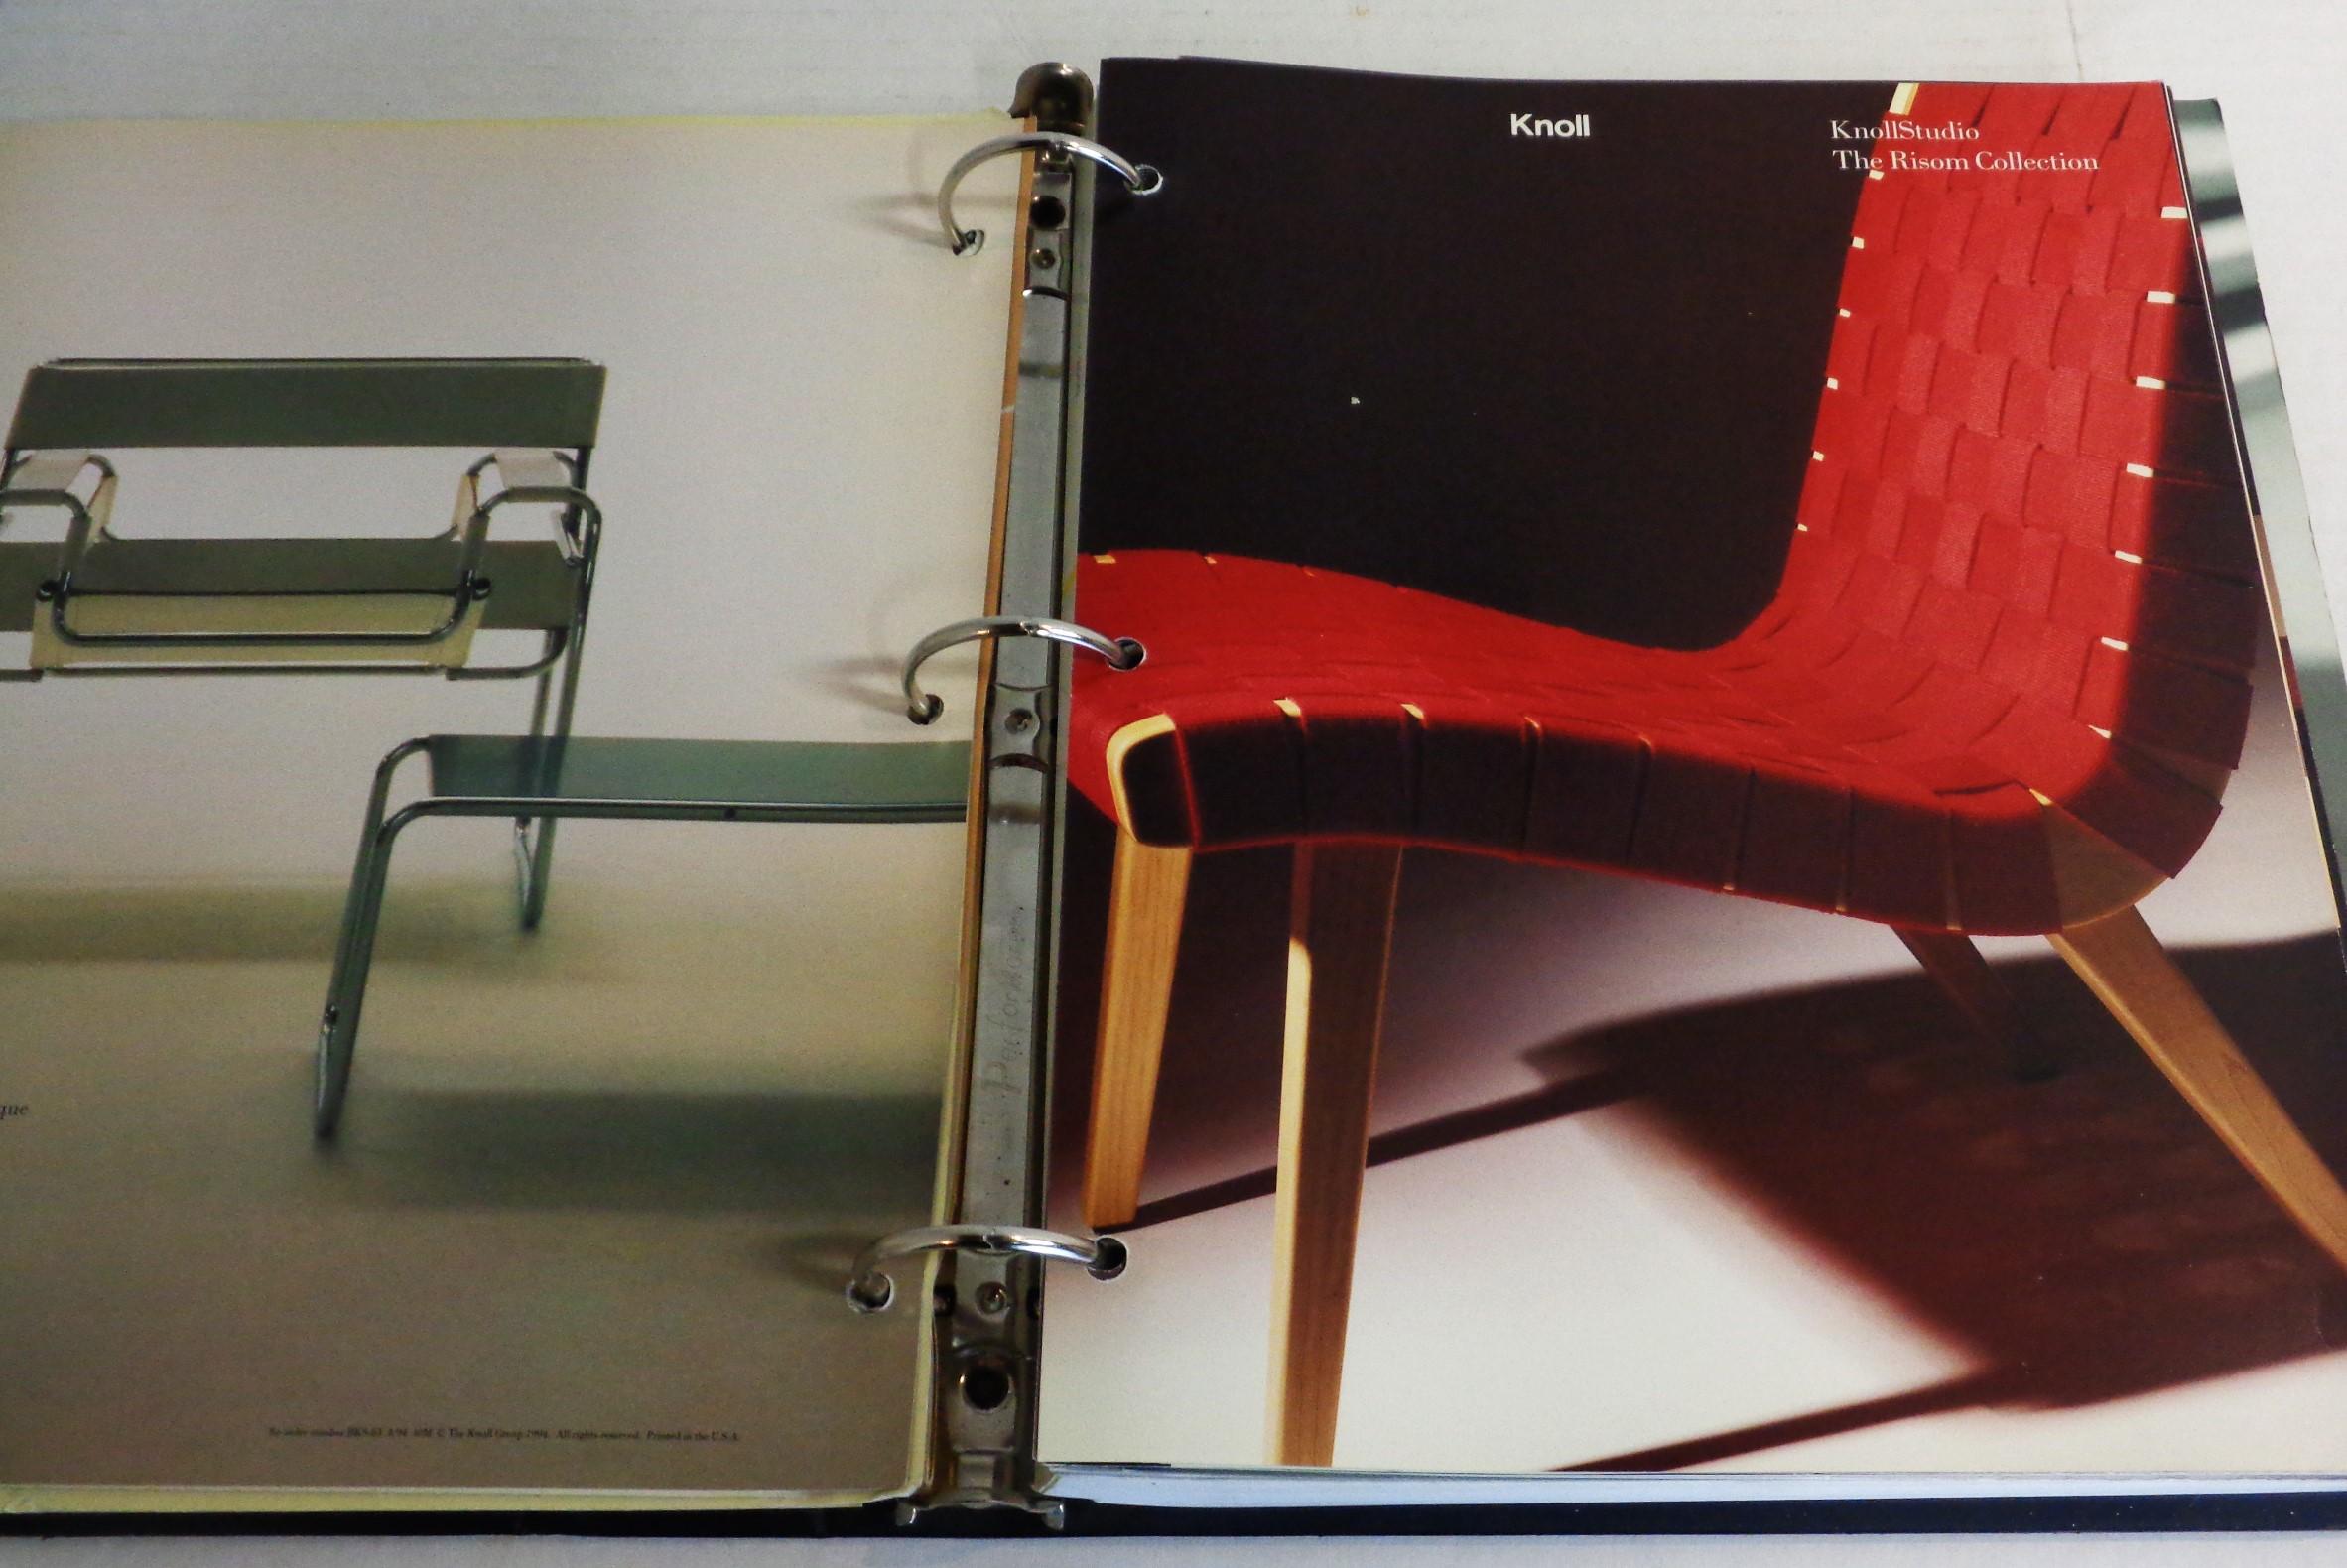 Contemporary Knoll Studio Collection - Binder - Catalogues - Price List - Year 2000 For Sale